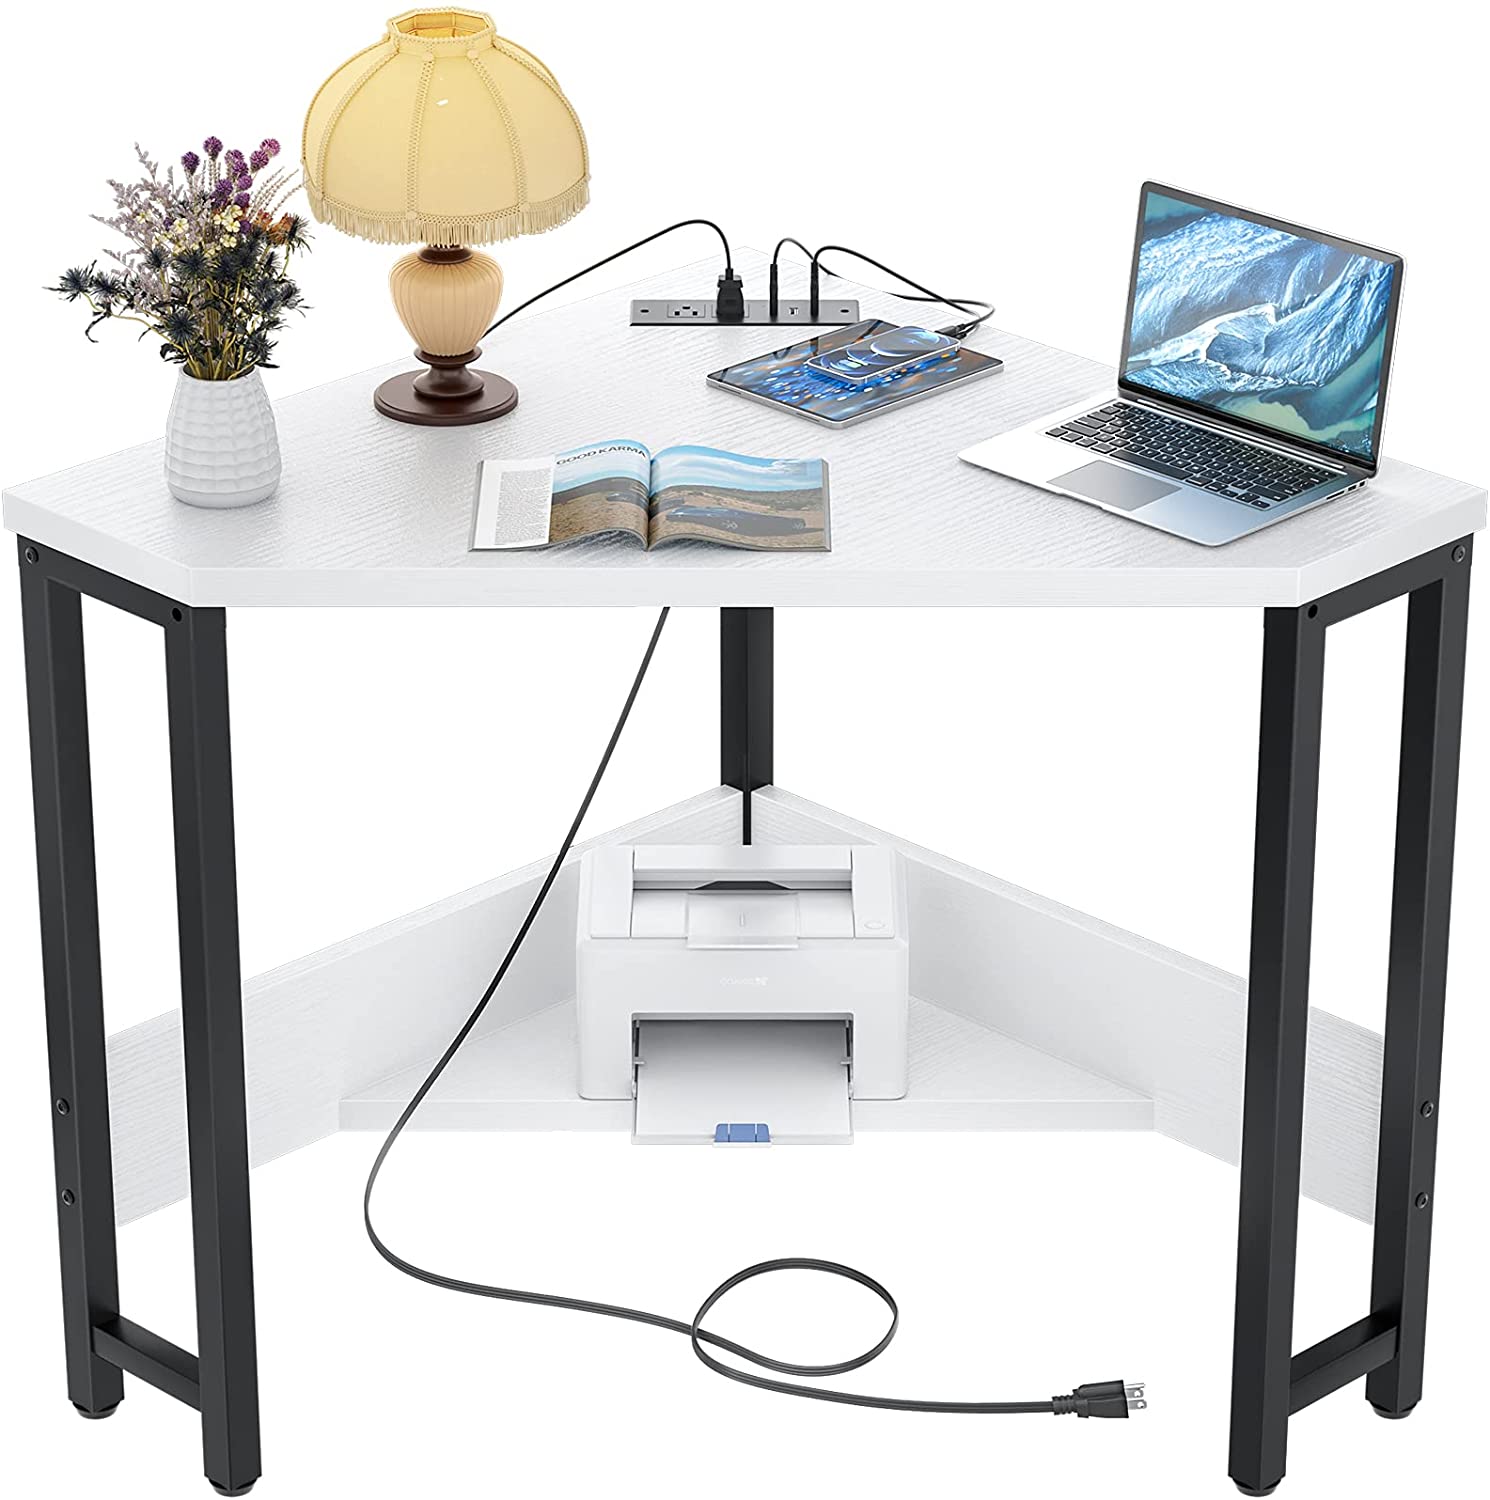 Armocity Corner Desk Small Desk with Outlets Corner Table for Small Space